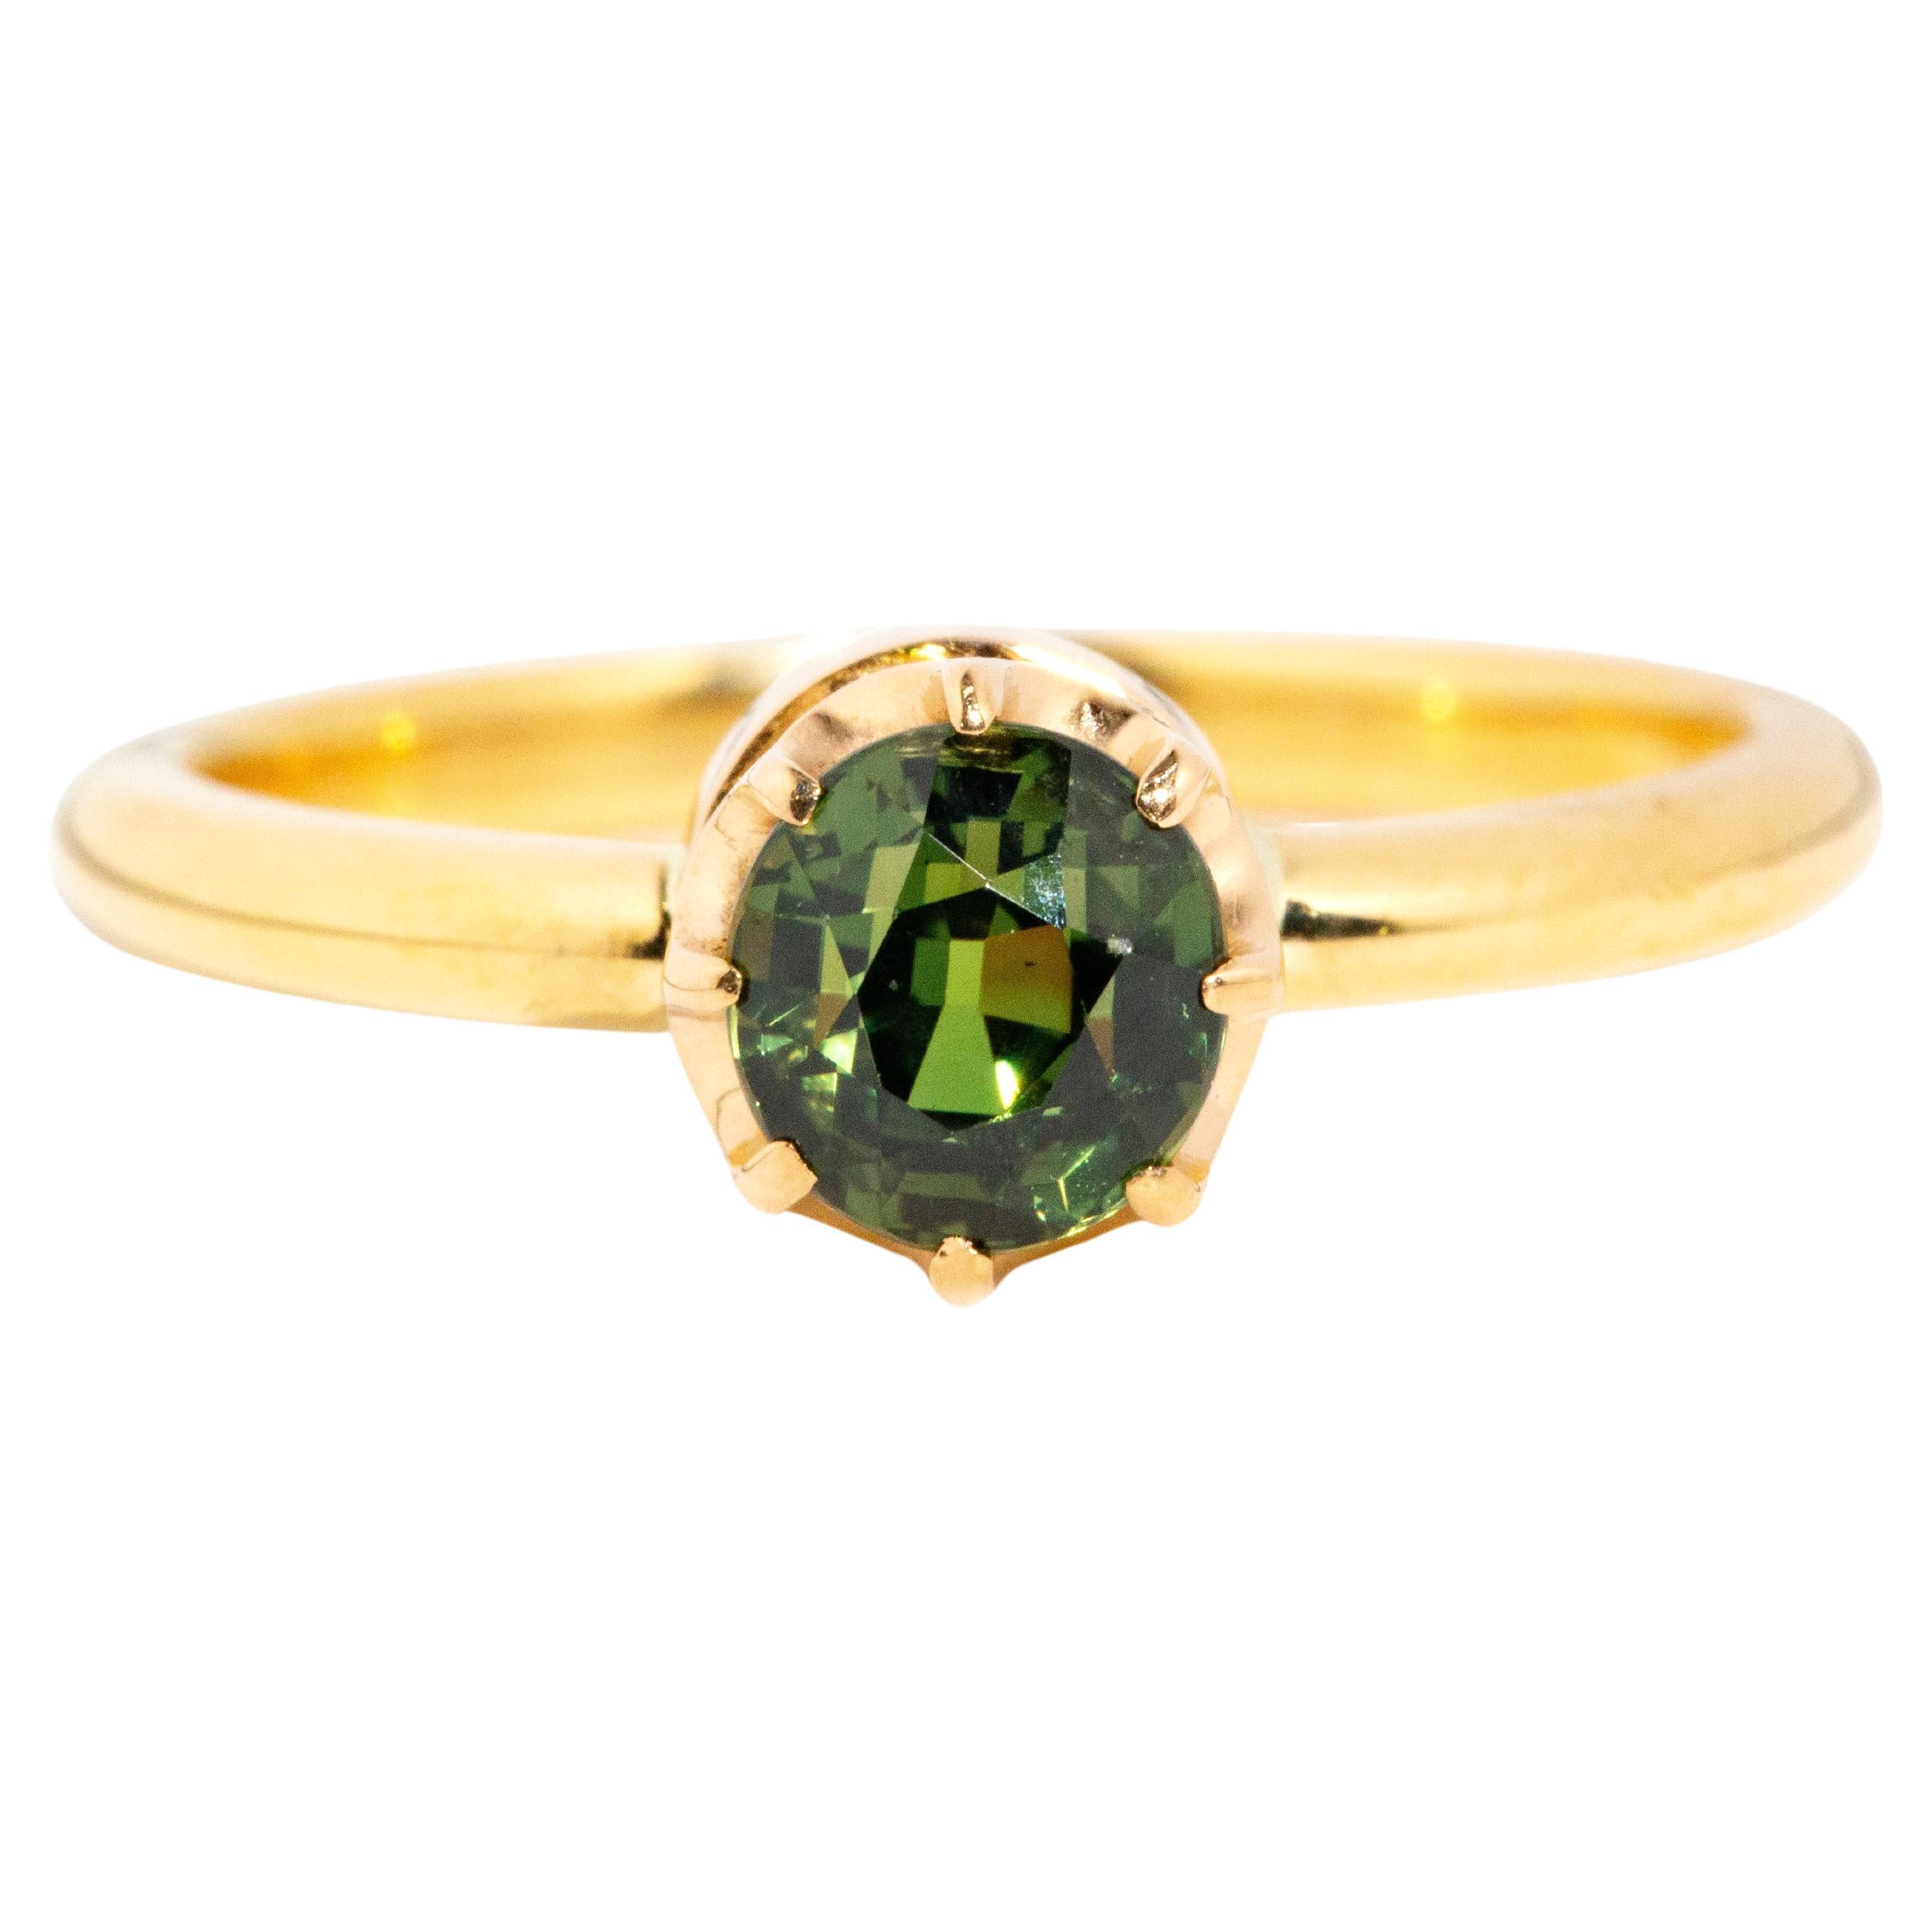 Reinvented 1.27 Carat Green Oval Sapphire Solitaire Ring 18 Carat Yellow Gold